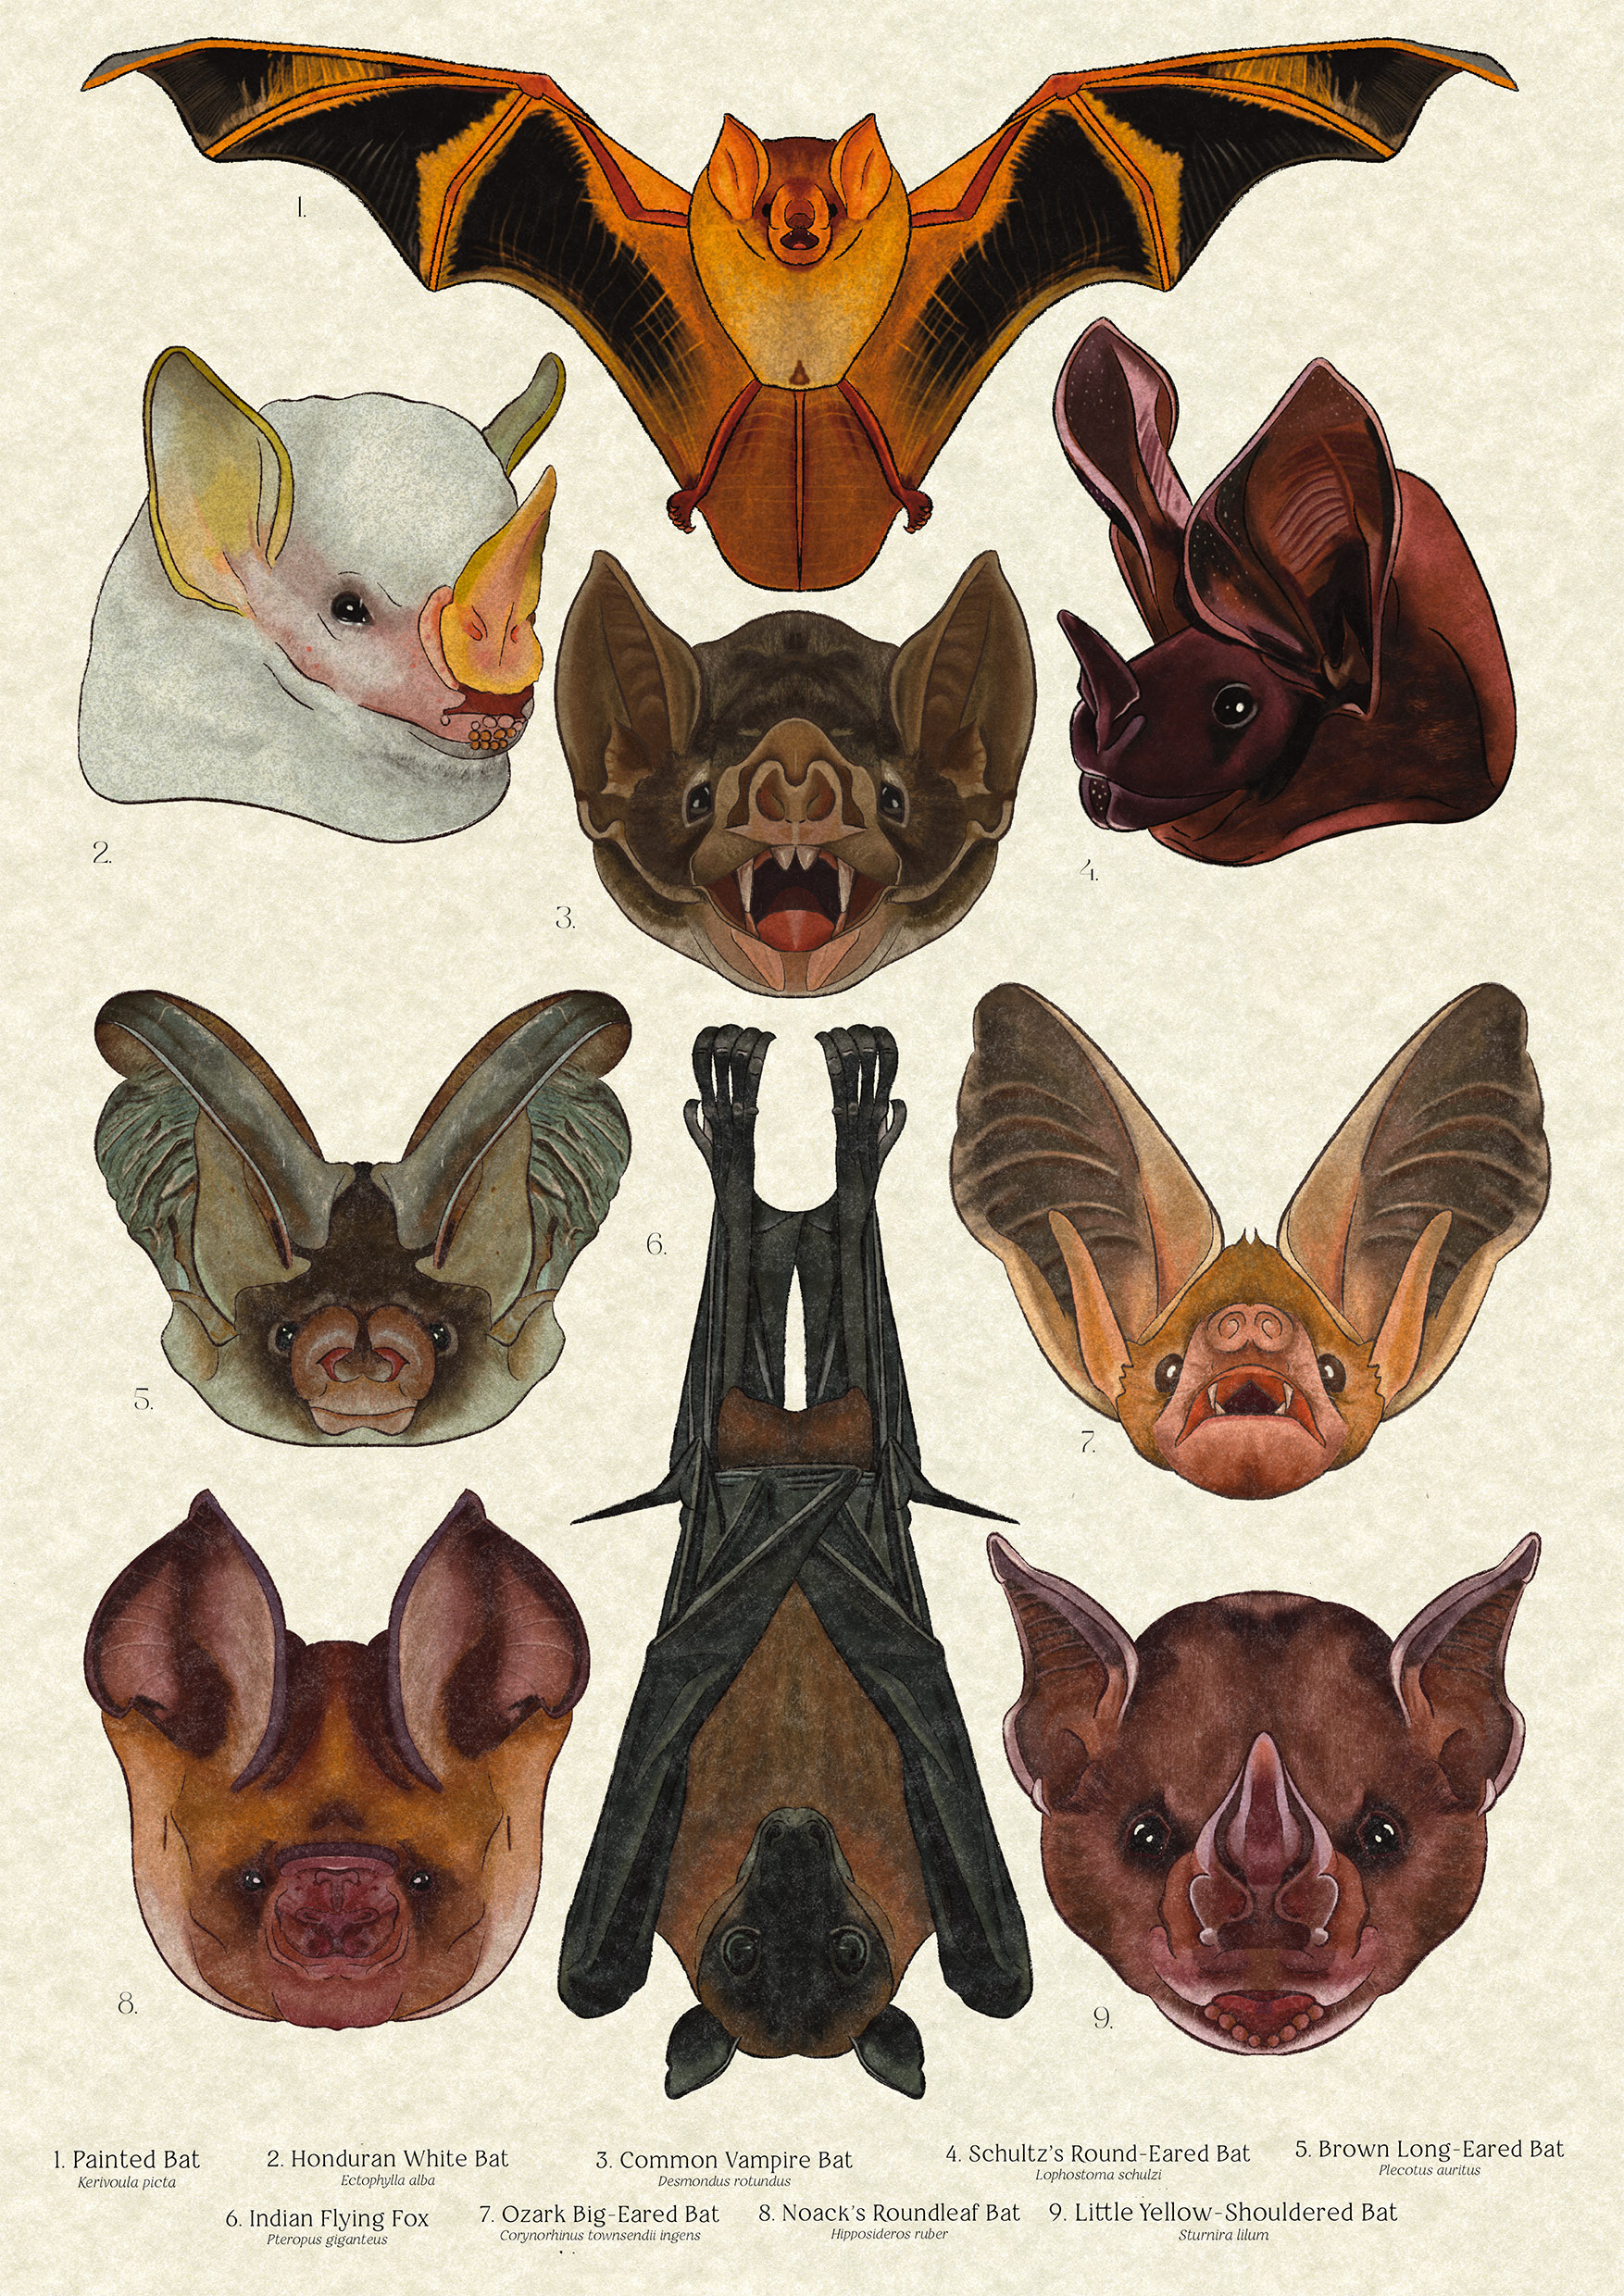 BA Illustration work by Chloe Smith showing nine bats arranged together on a page